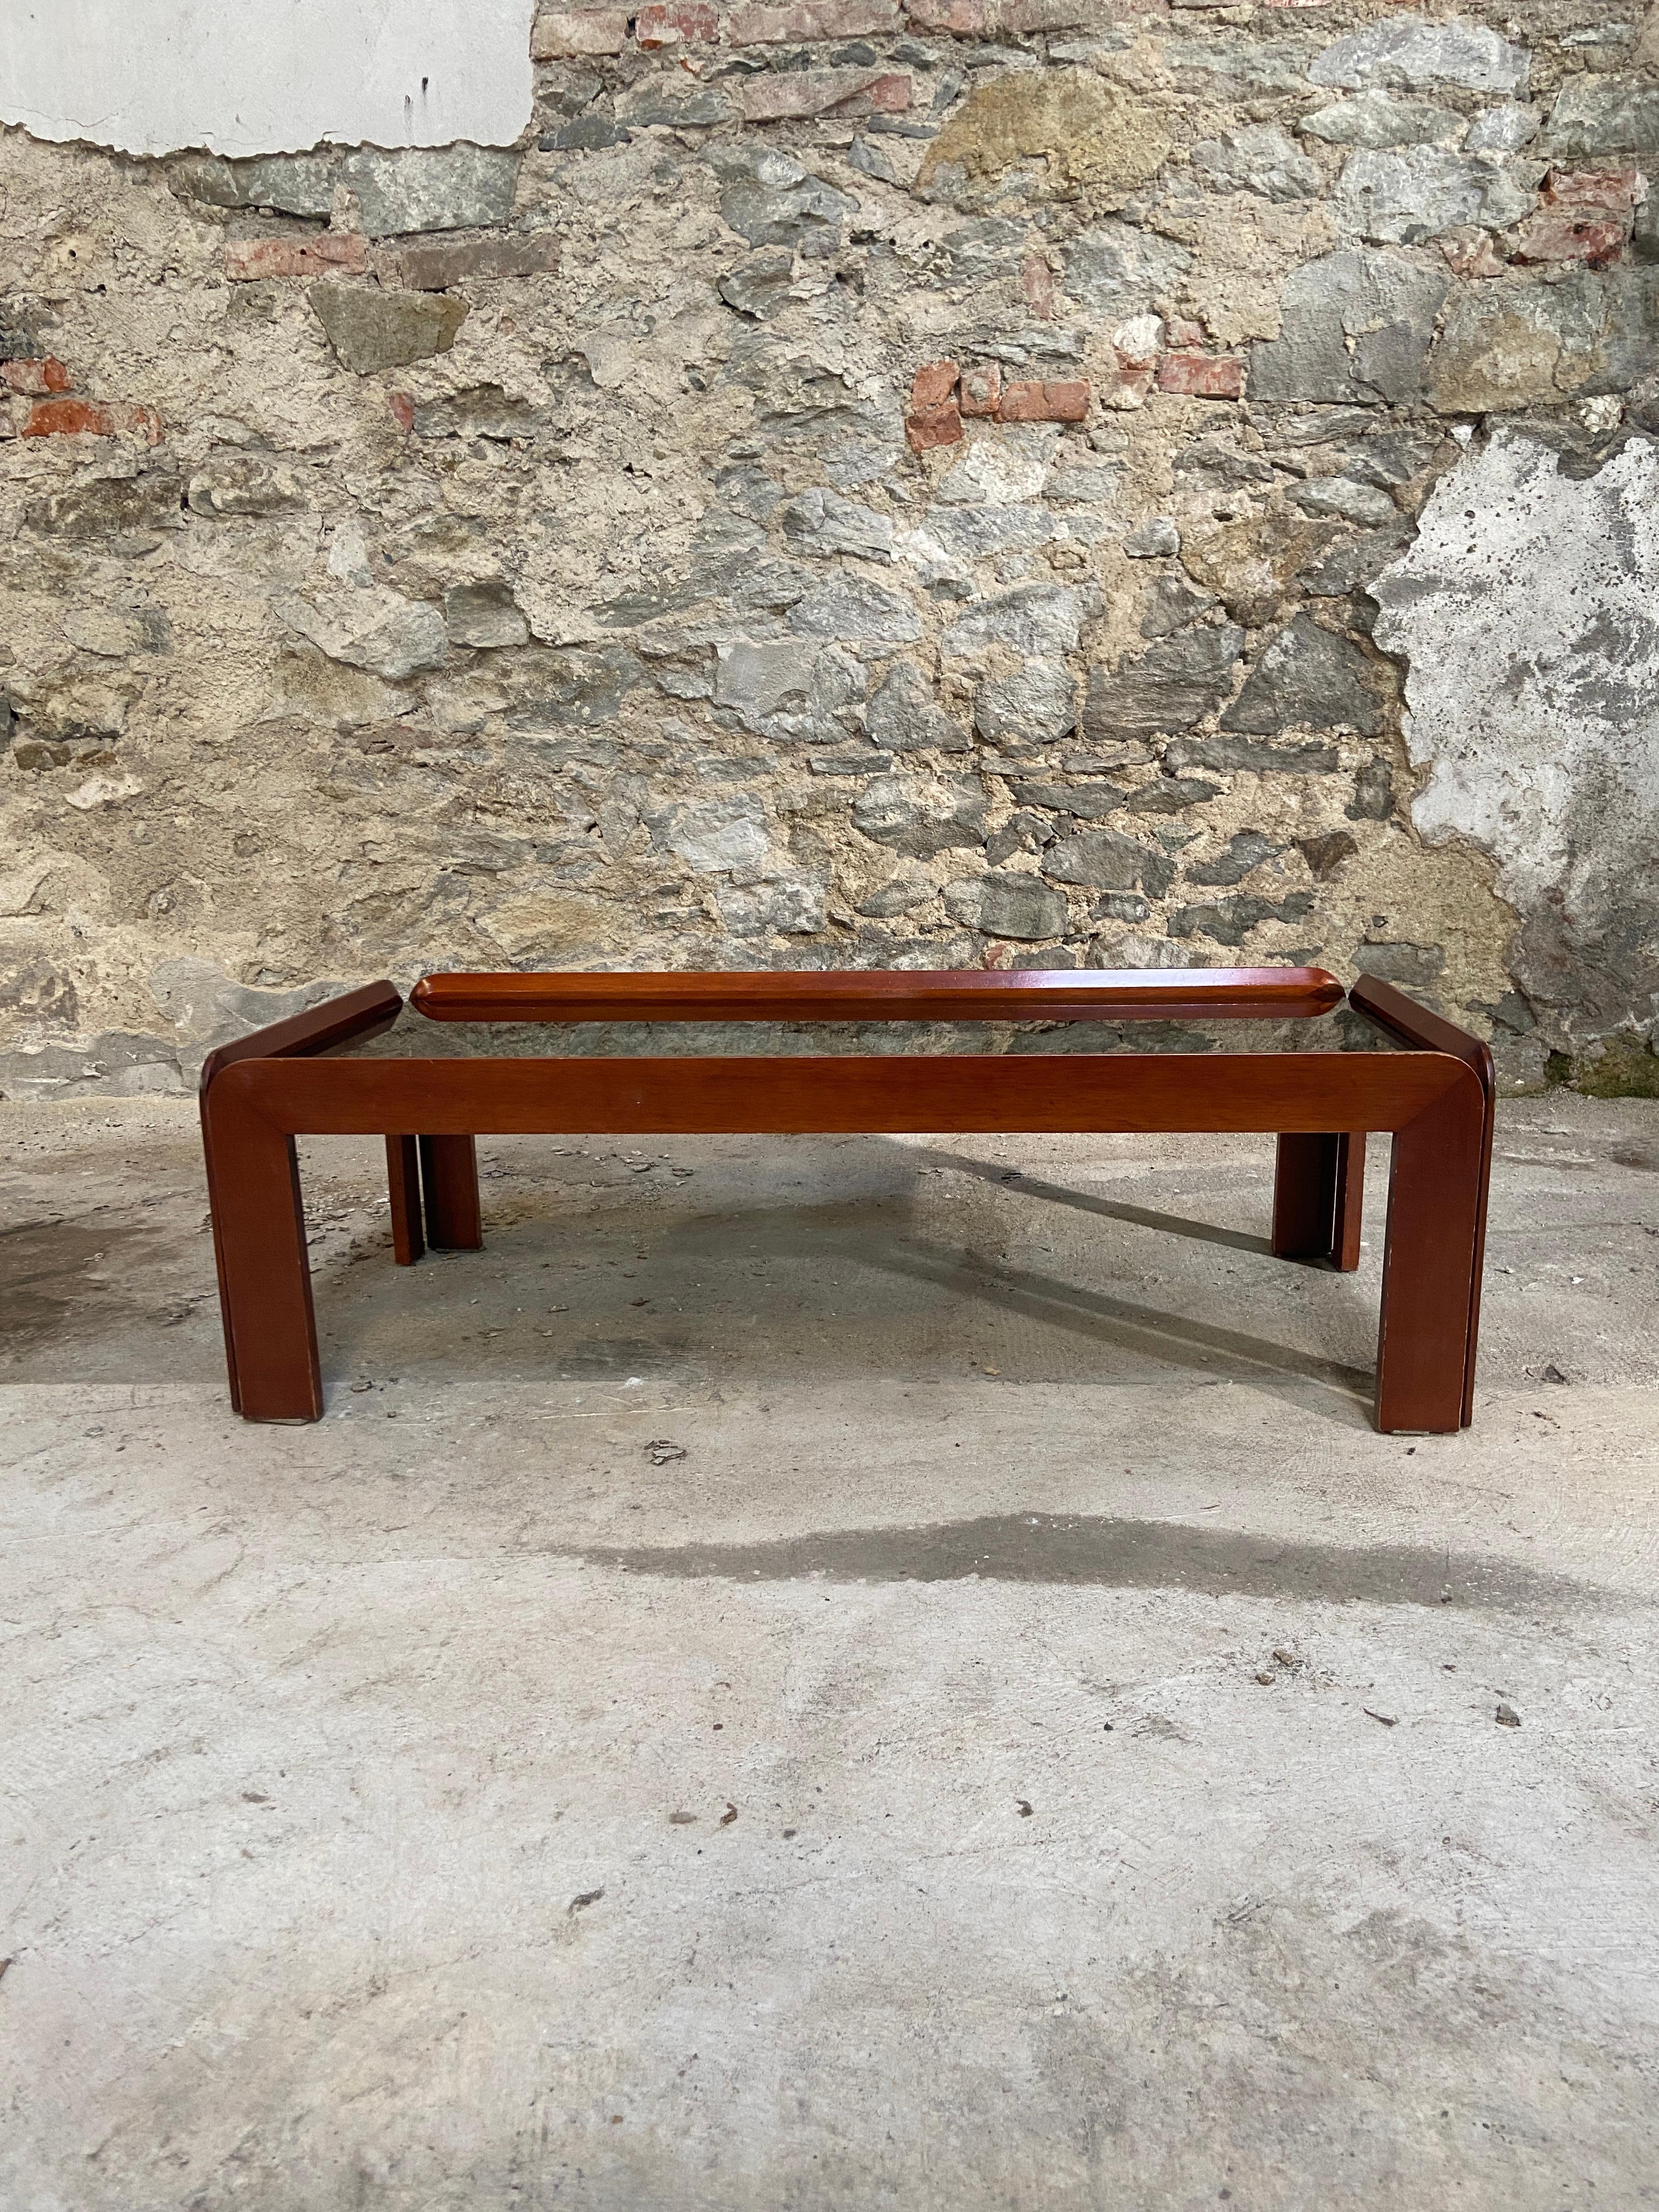 Mid-Century Modern Italian mahogany coffee or sofa table with Smoked Glass Top by Afra & Tobia Scarpa for Cassina.
The table is in really good vintage conditions. The Glass top has no scratches and the solid wood base presents some light wear